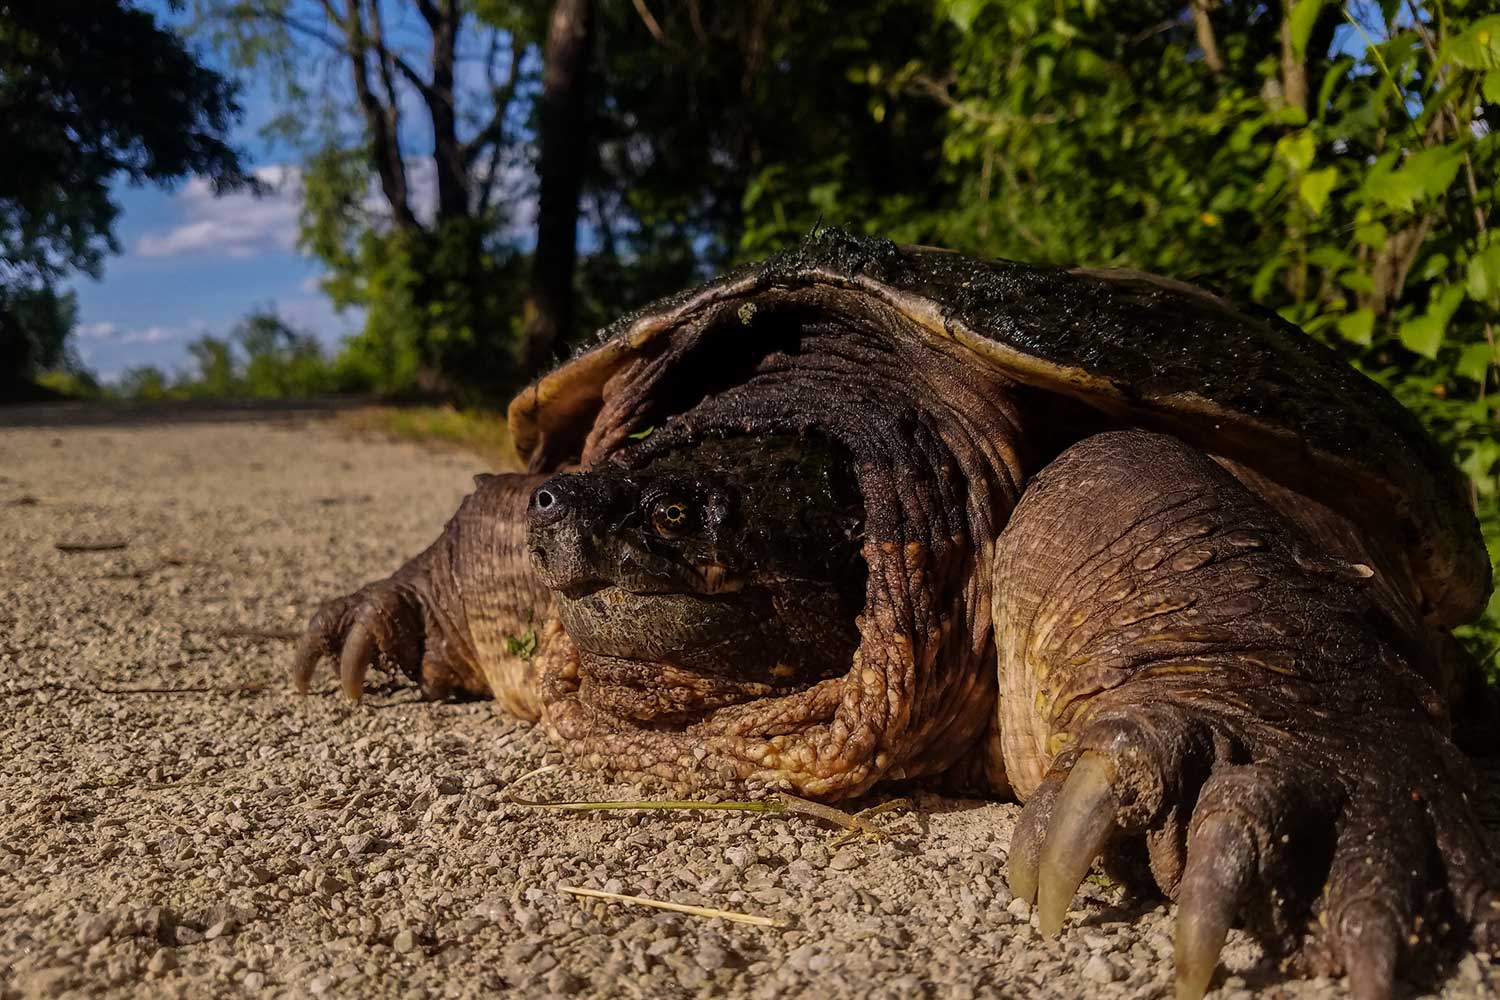 A closeup on a snapping turtle on a crushed limestone trail lined with trees.